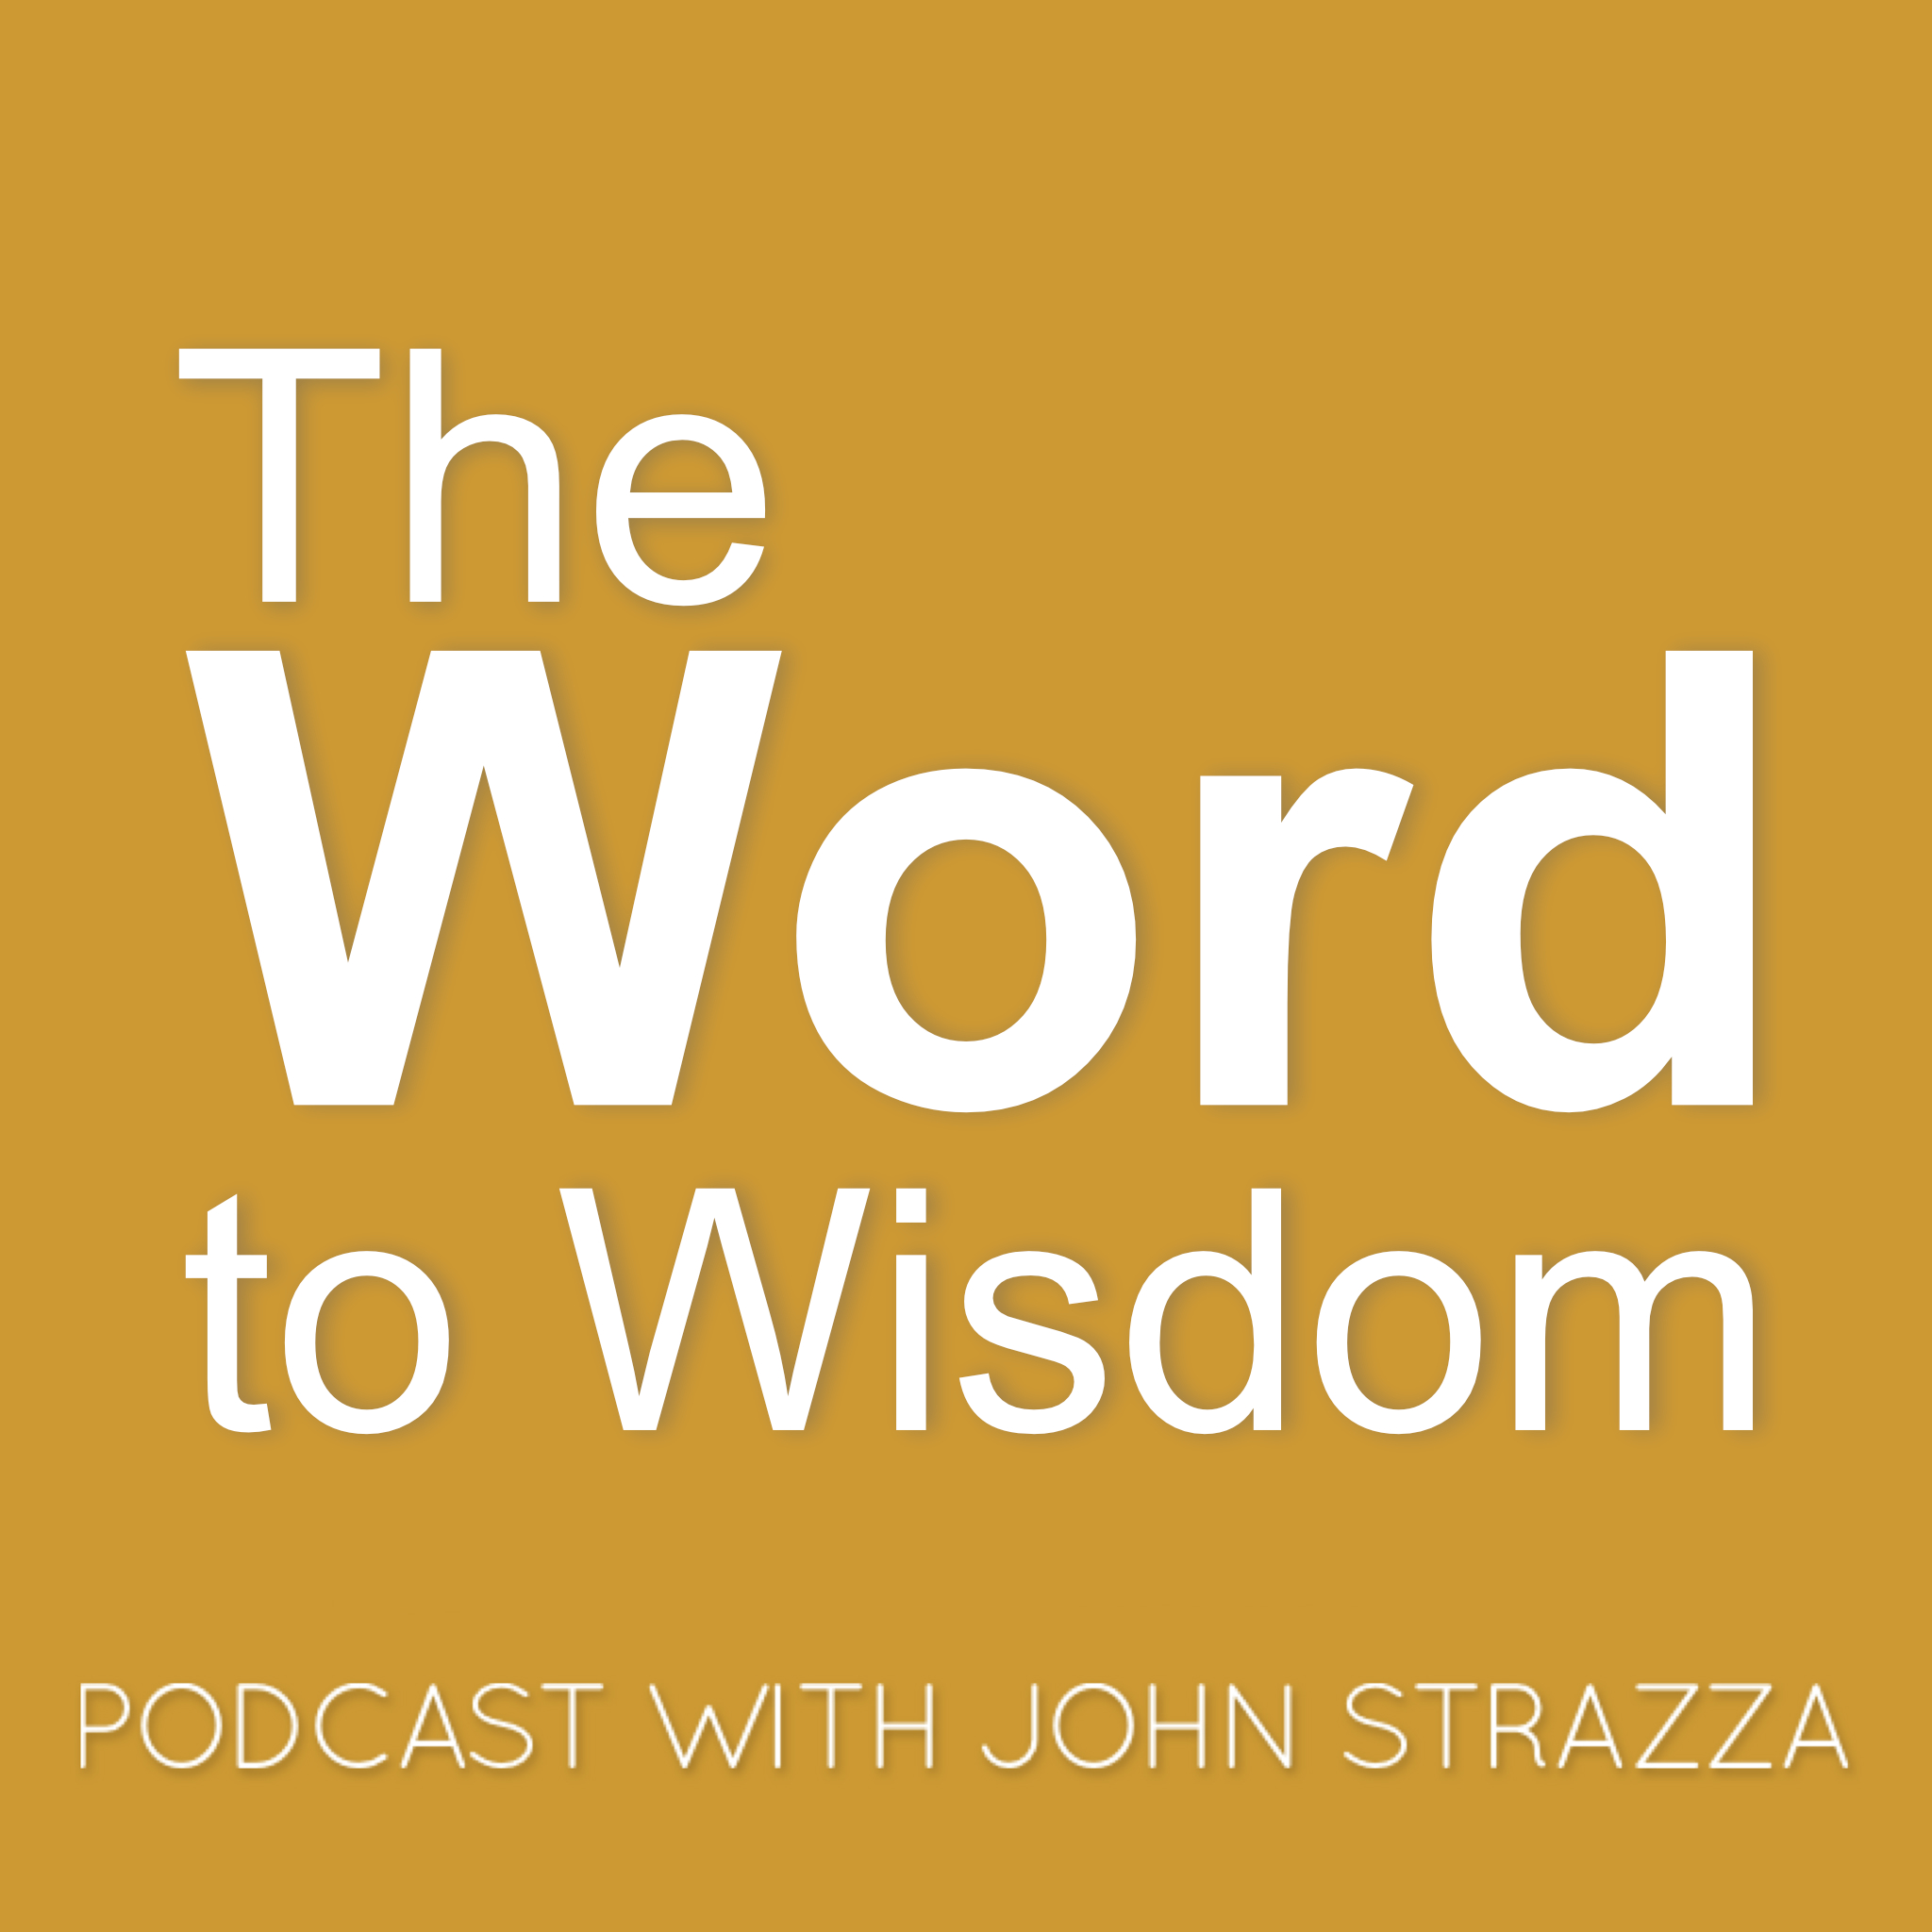 The Sowers Seeds podcast with John Strazza